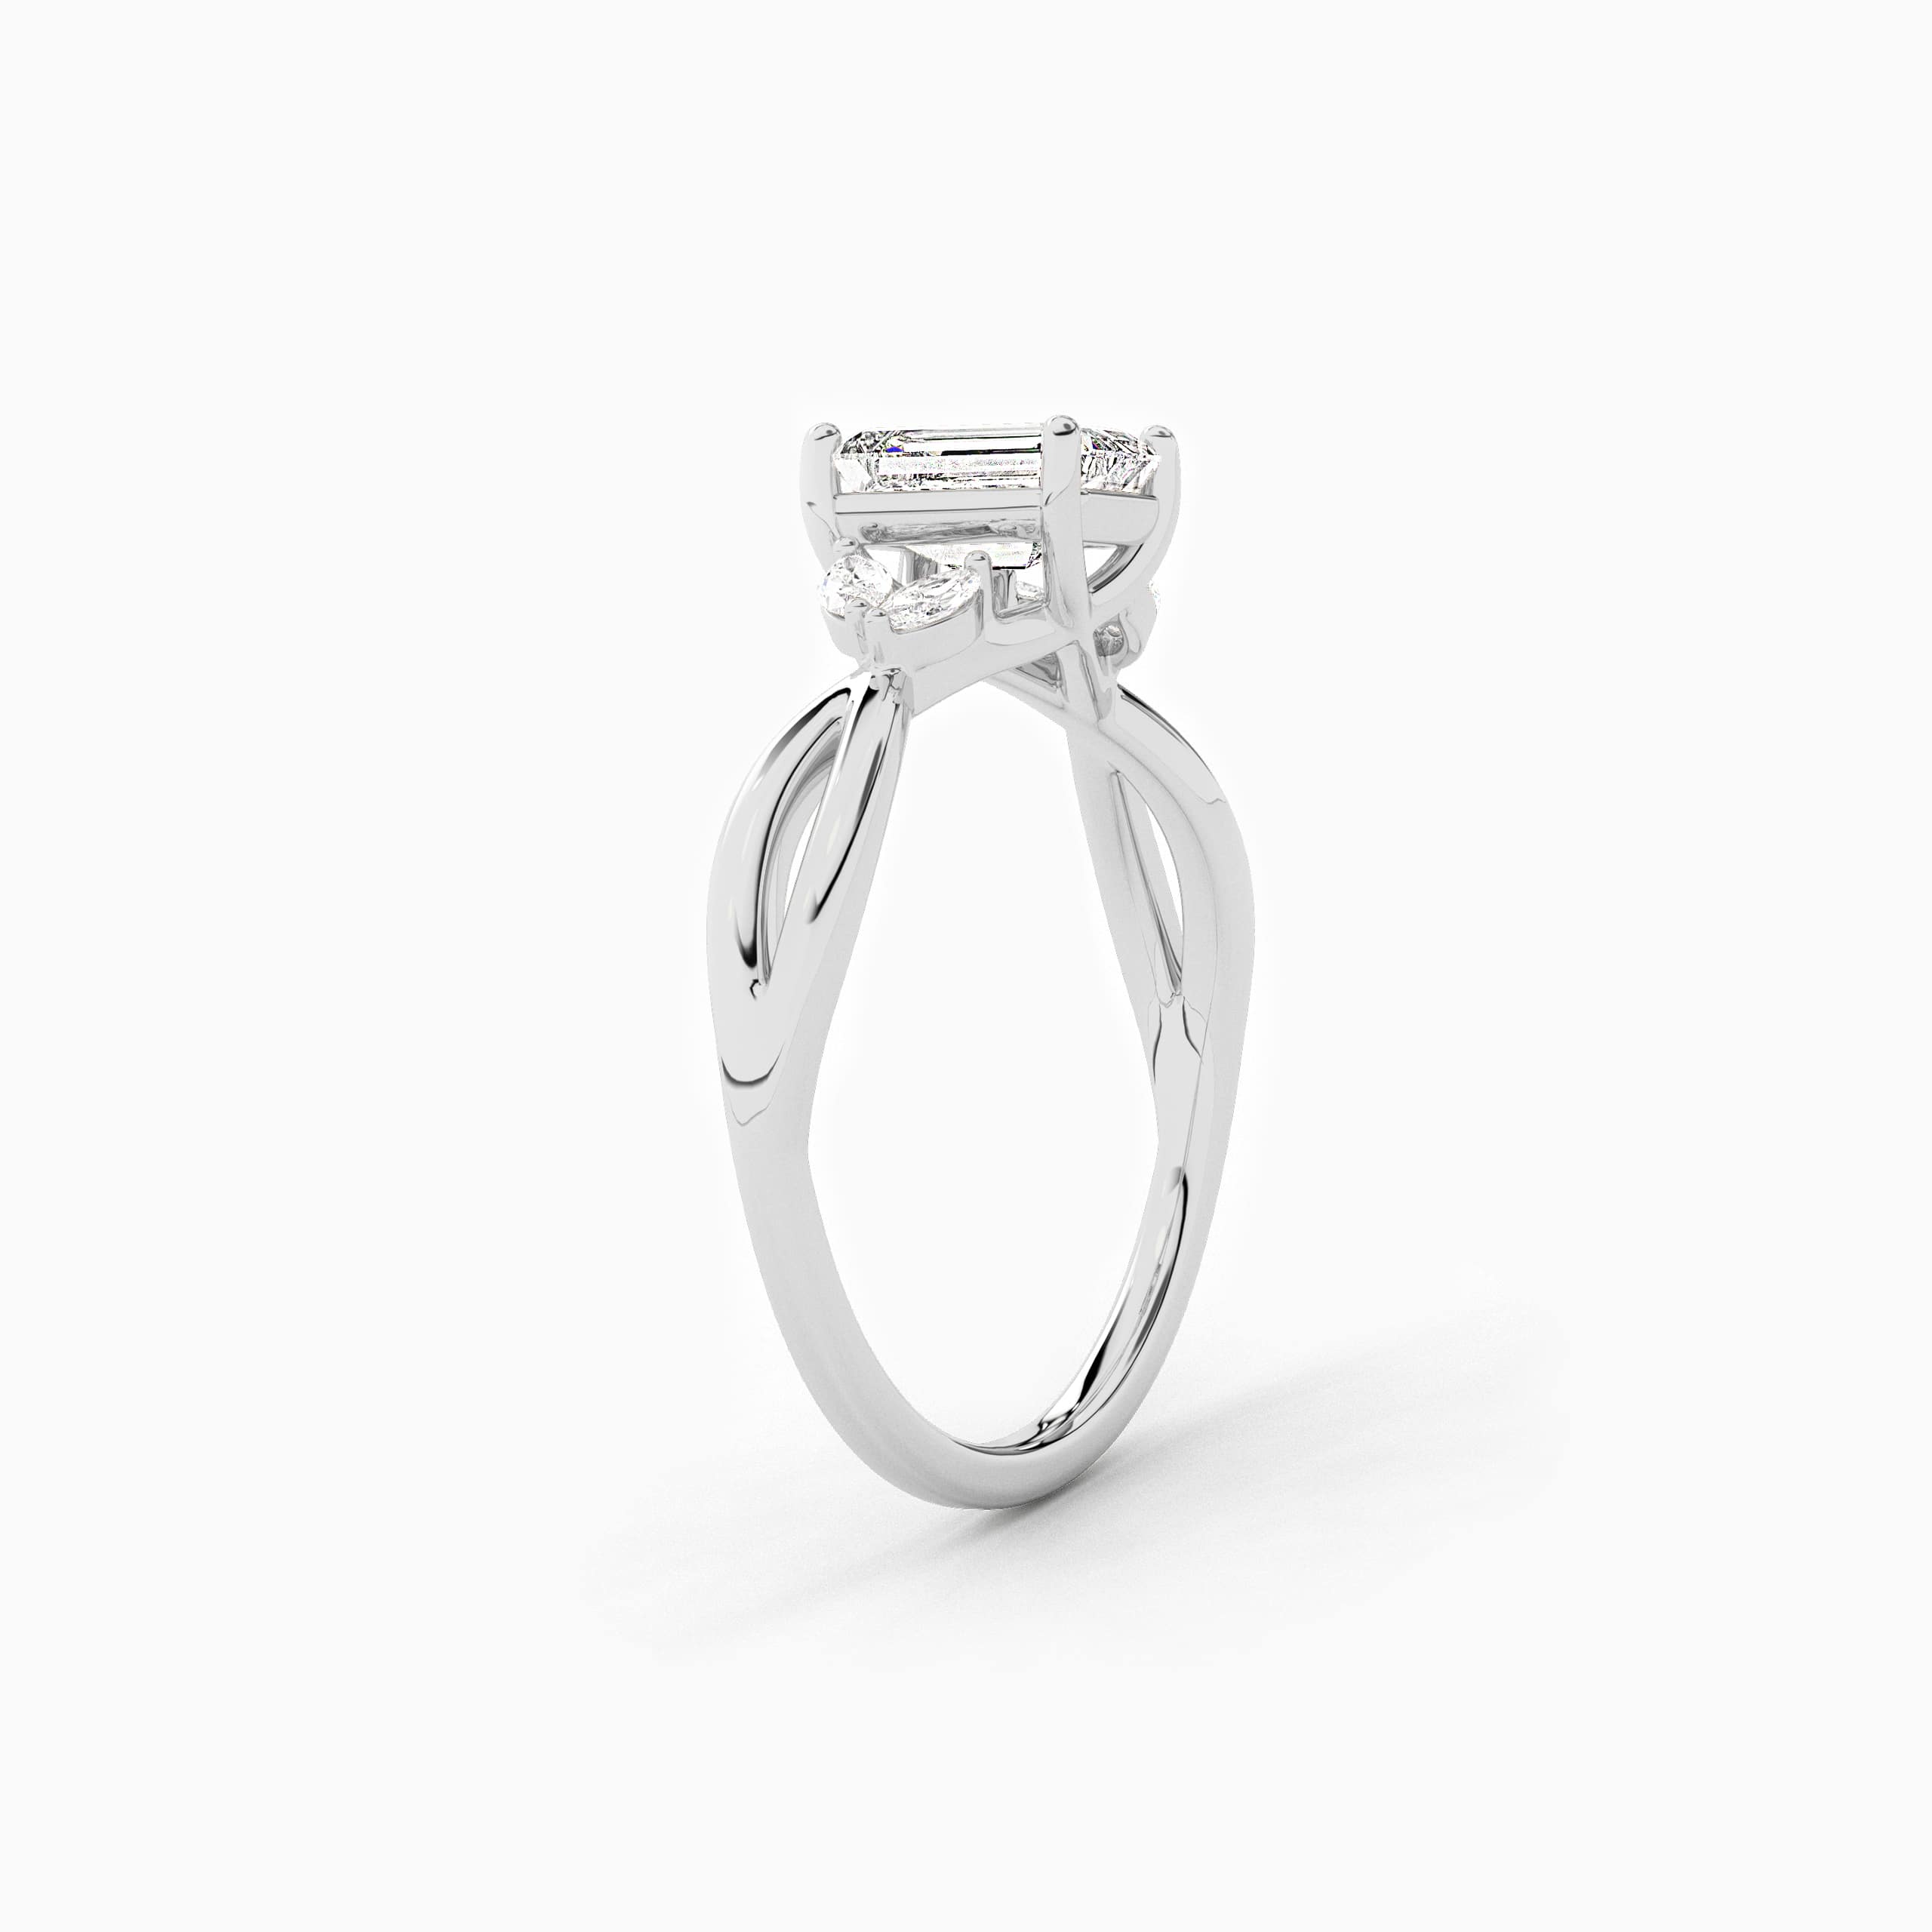 Emerald Cut Twisted Petal Diamond Engagement Ring With White Gold